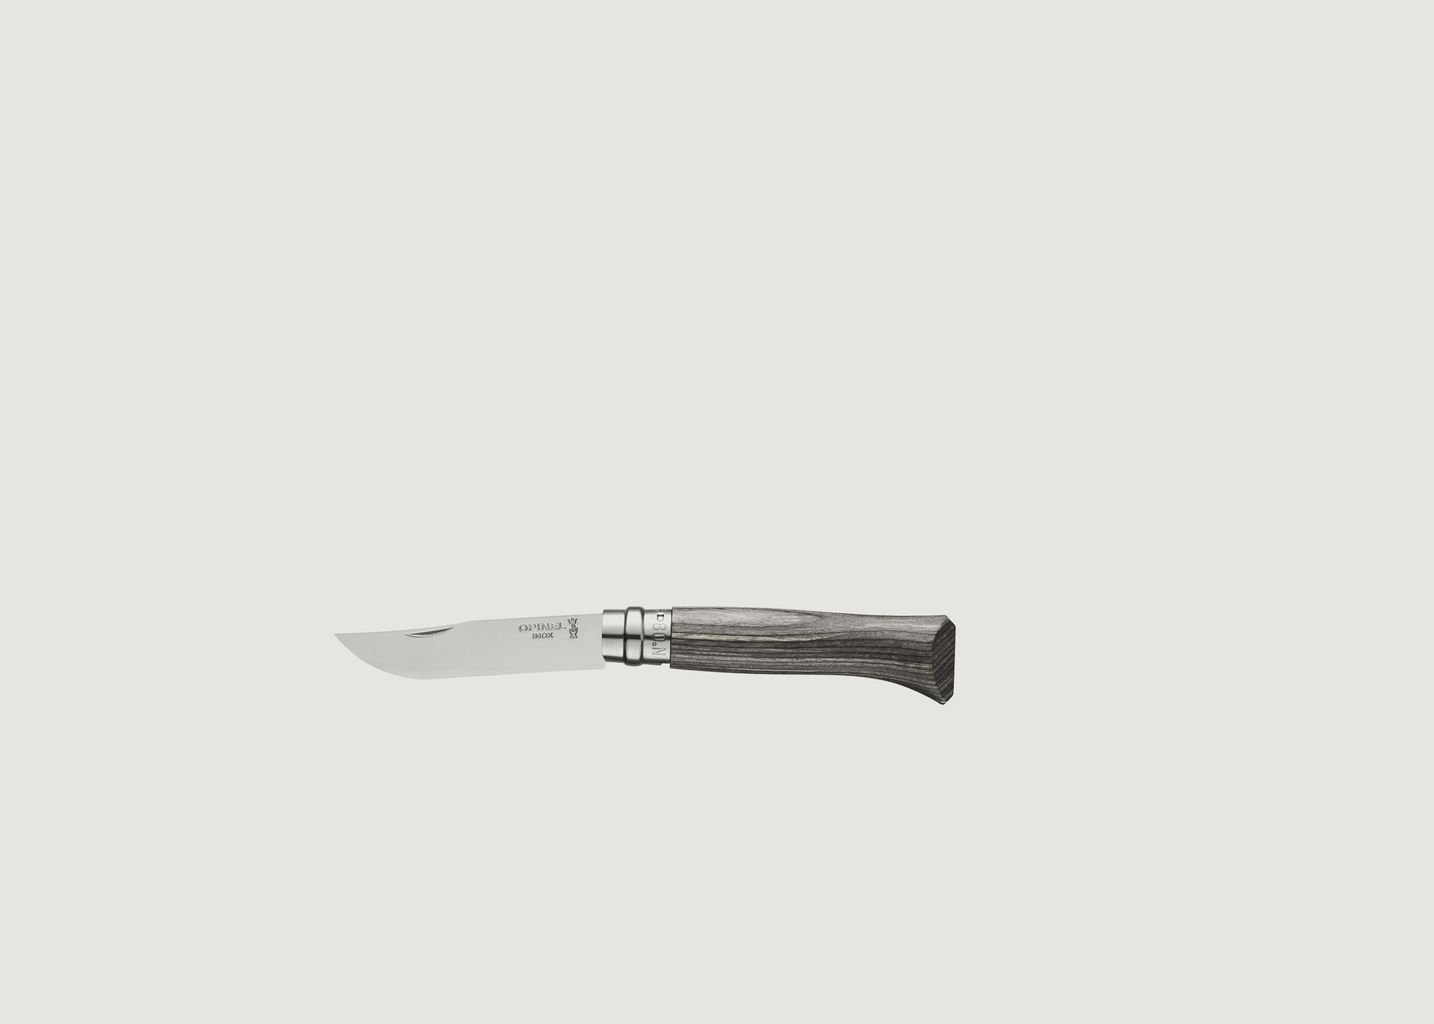 Limited Edition Ardoise N°8 Knife - Opinel